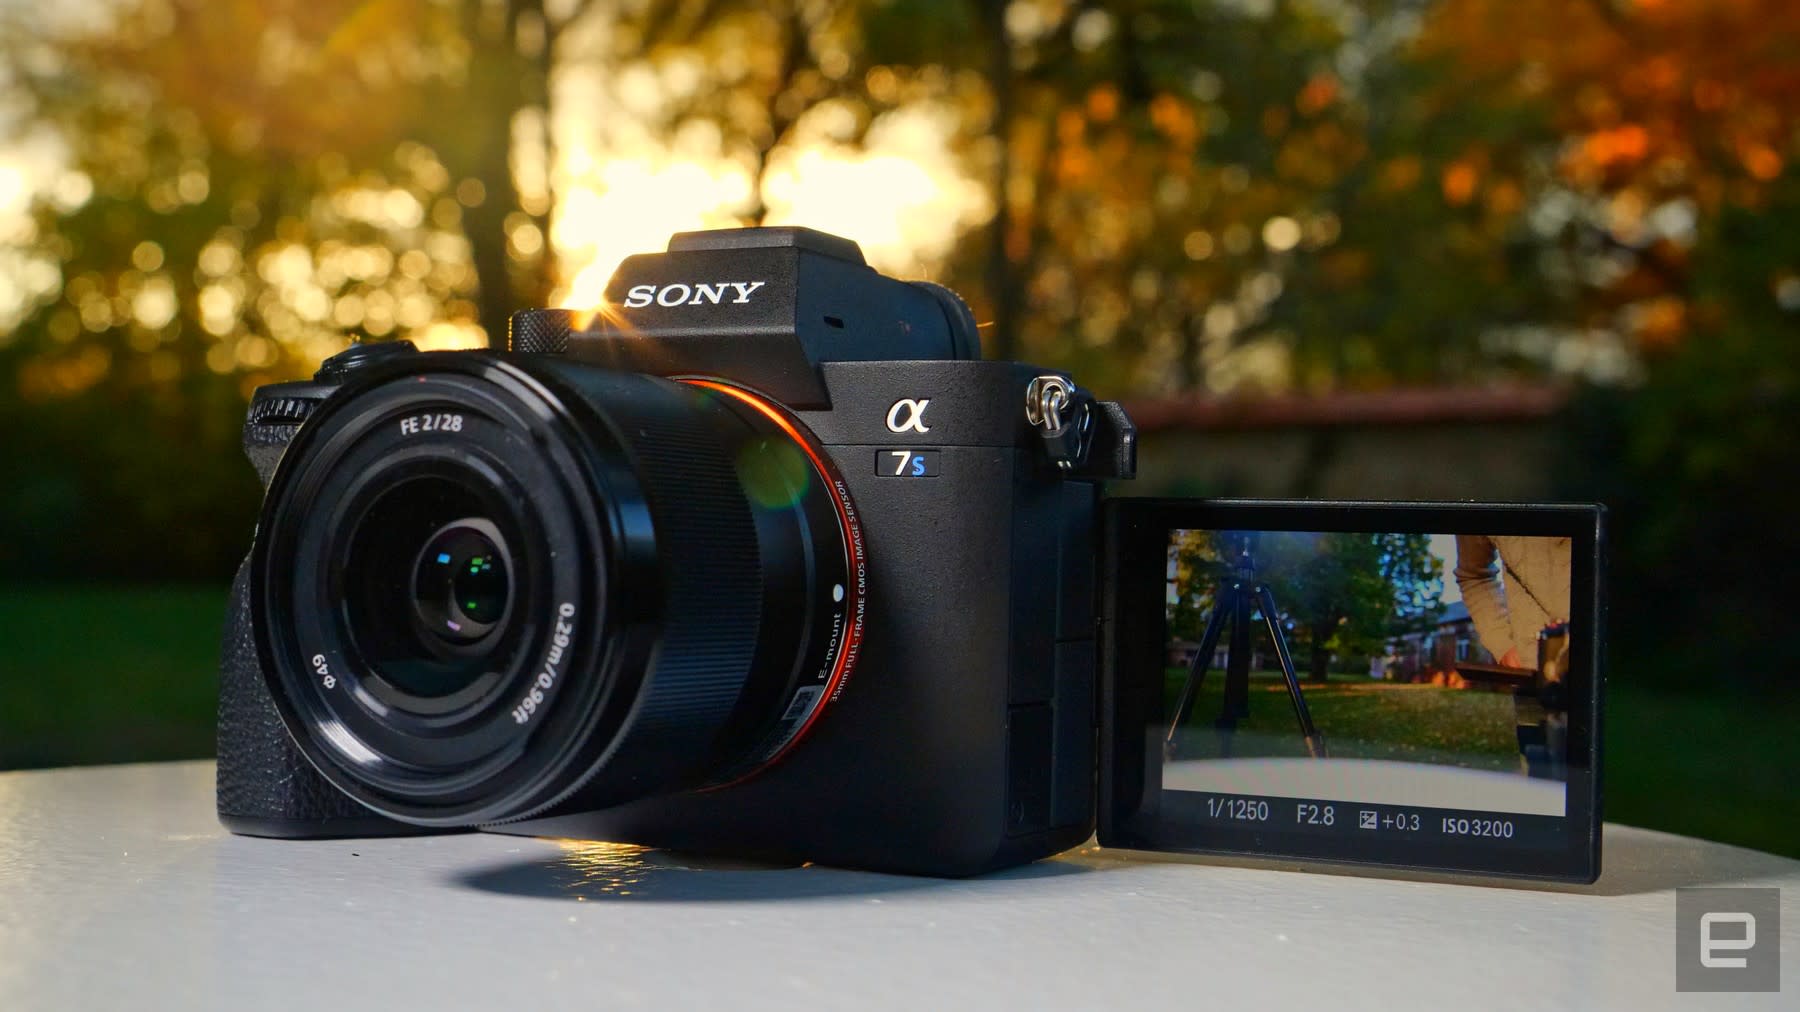 Sony A7S III review: The best mirrorless camera for video, maybe everything  | Engadget